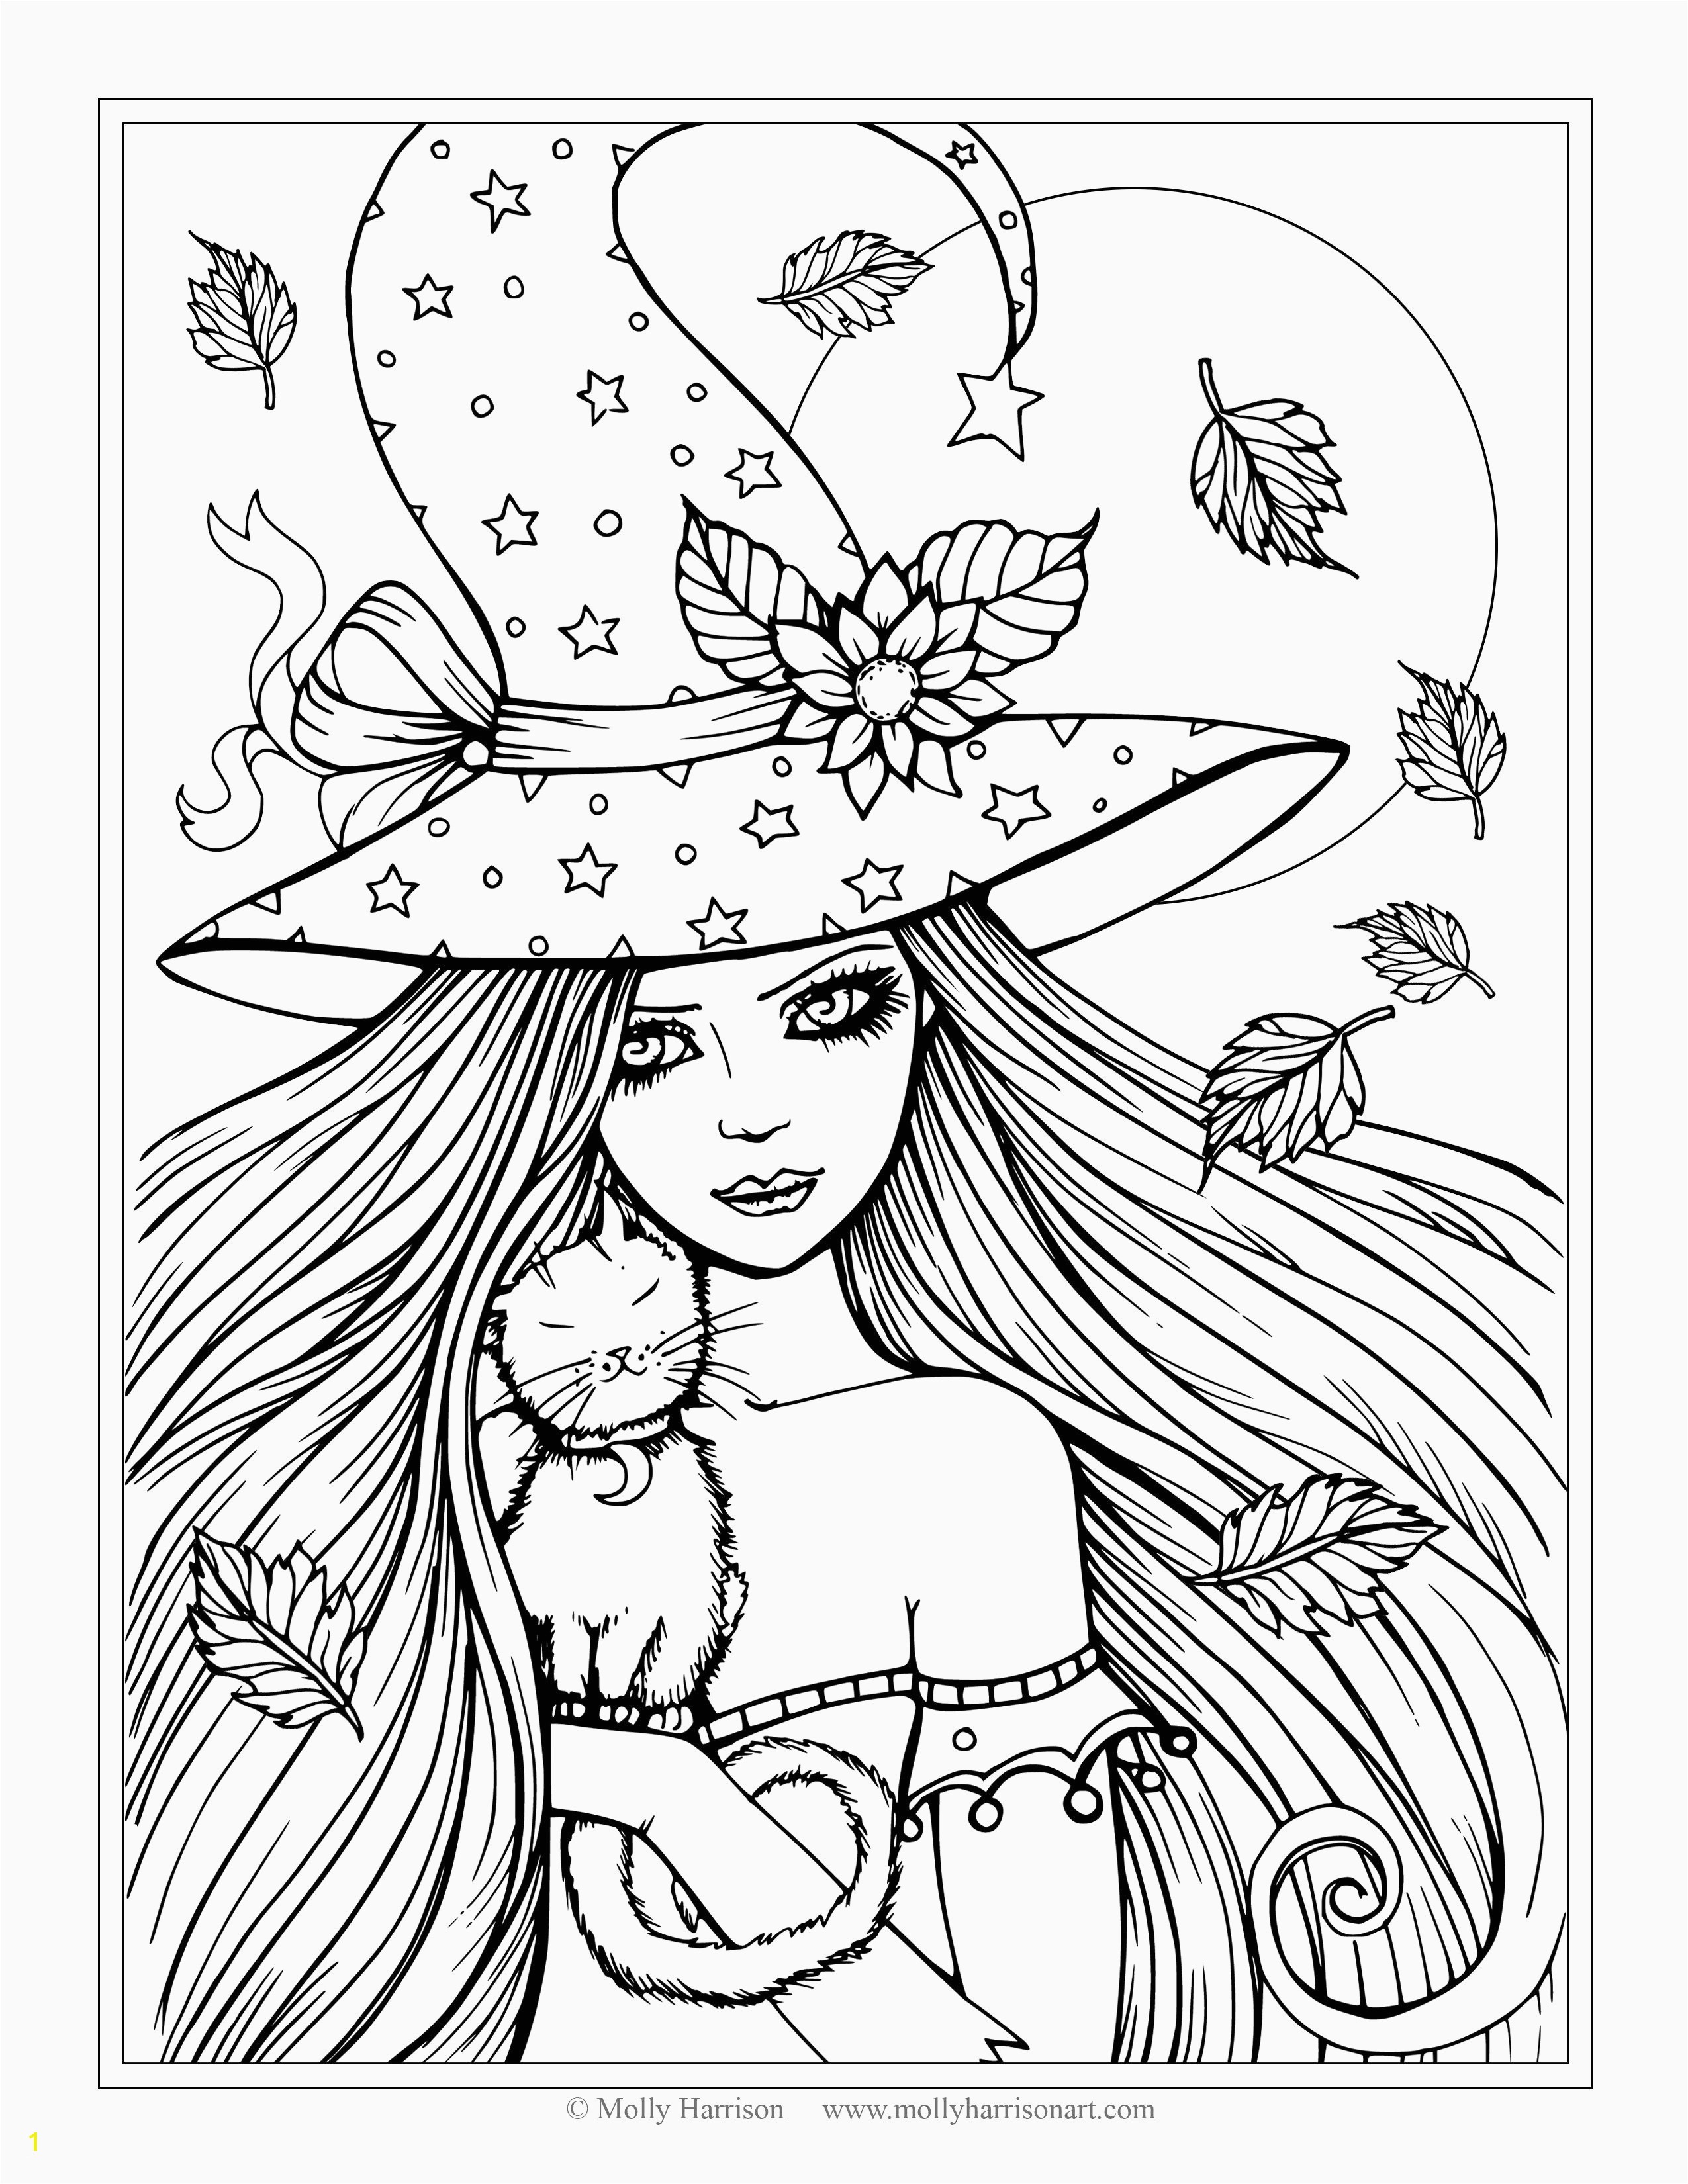 Lego Lone Ranger Coloring Pages Lego Lone Ranger Coloring Pages Free Coloring Pages Splatoon Sketch